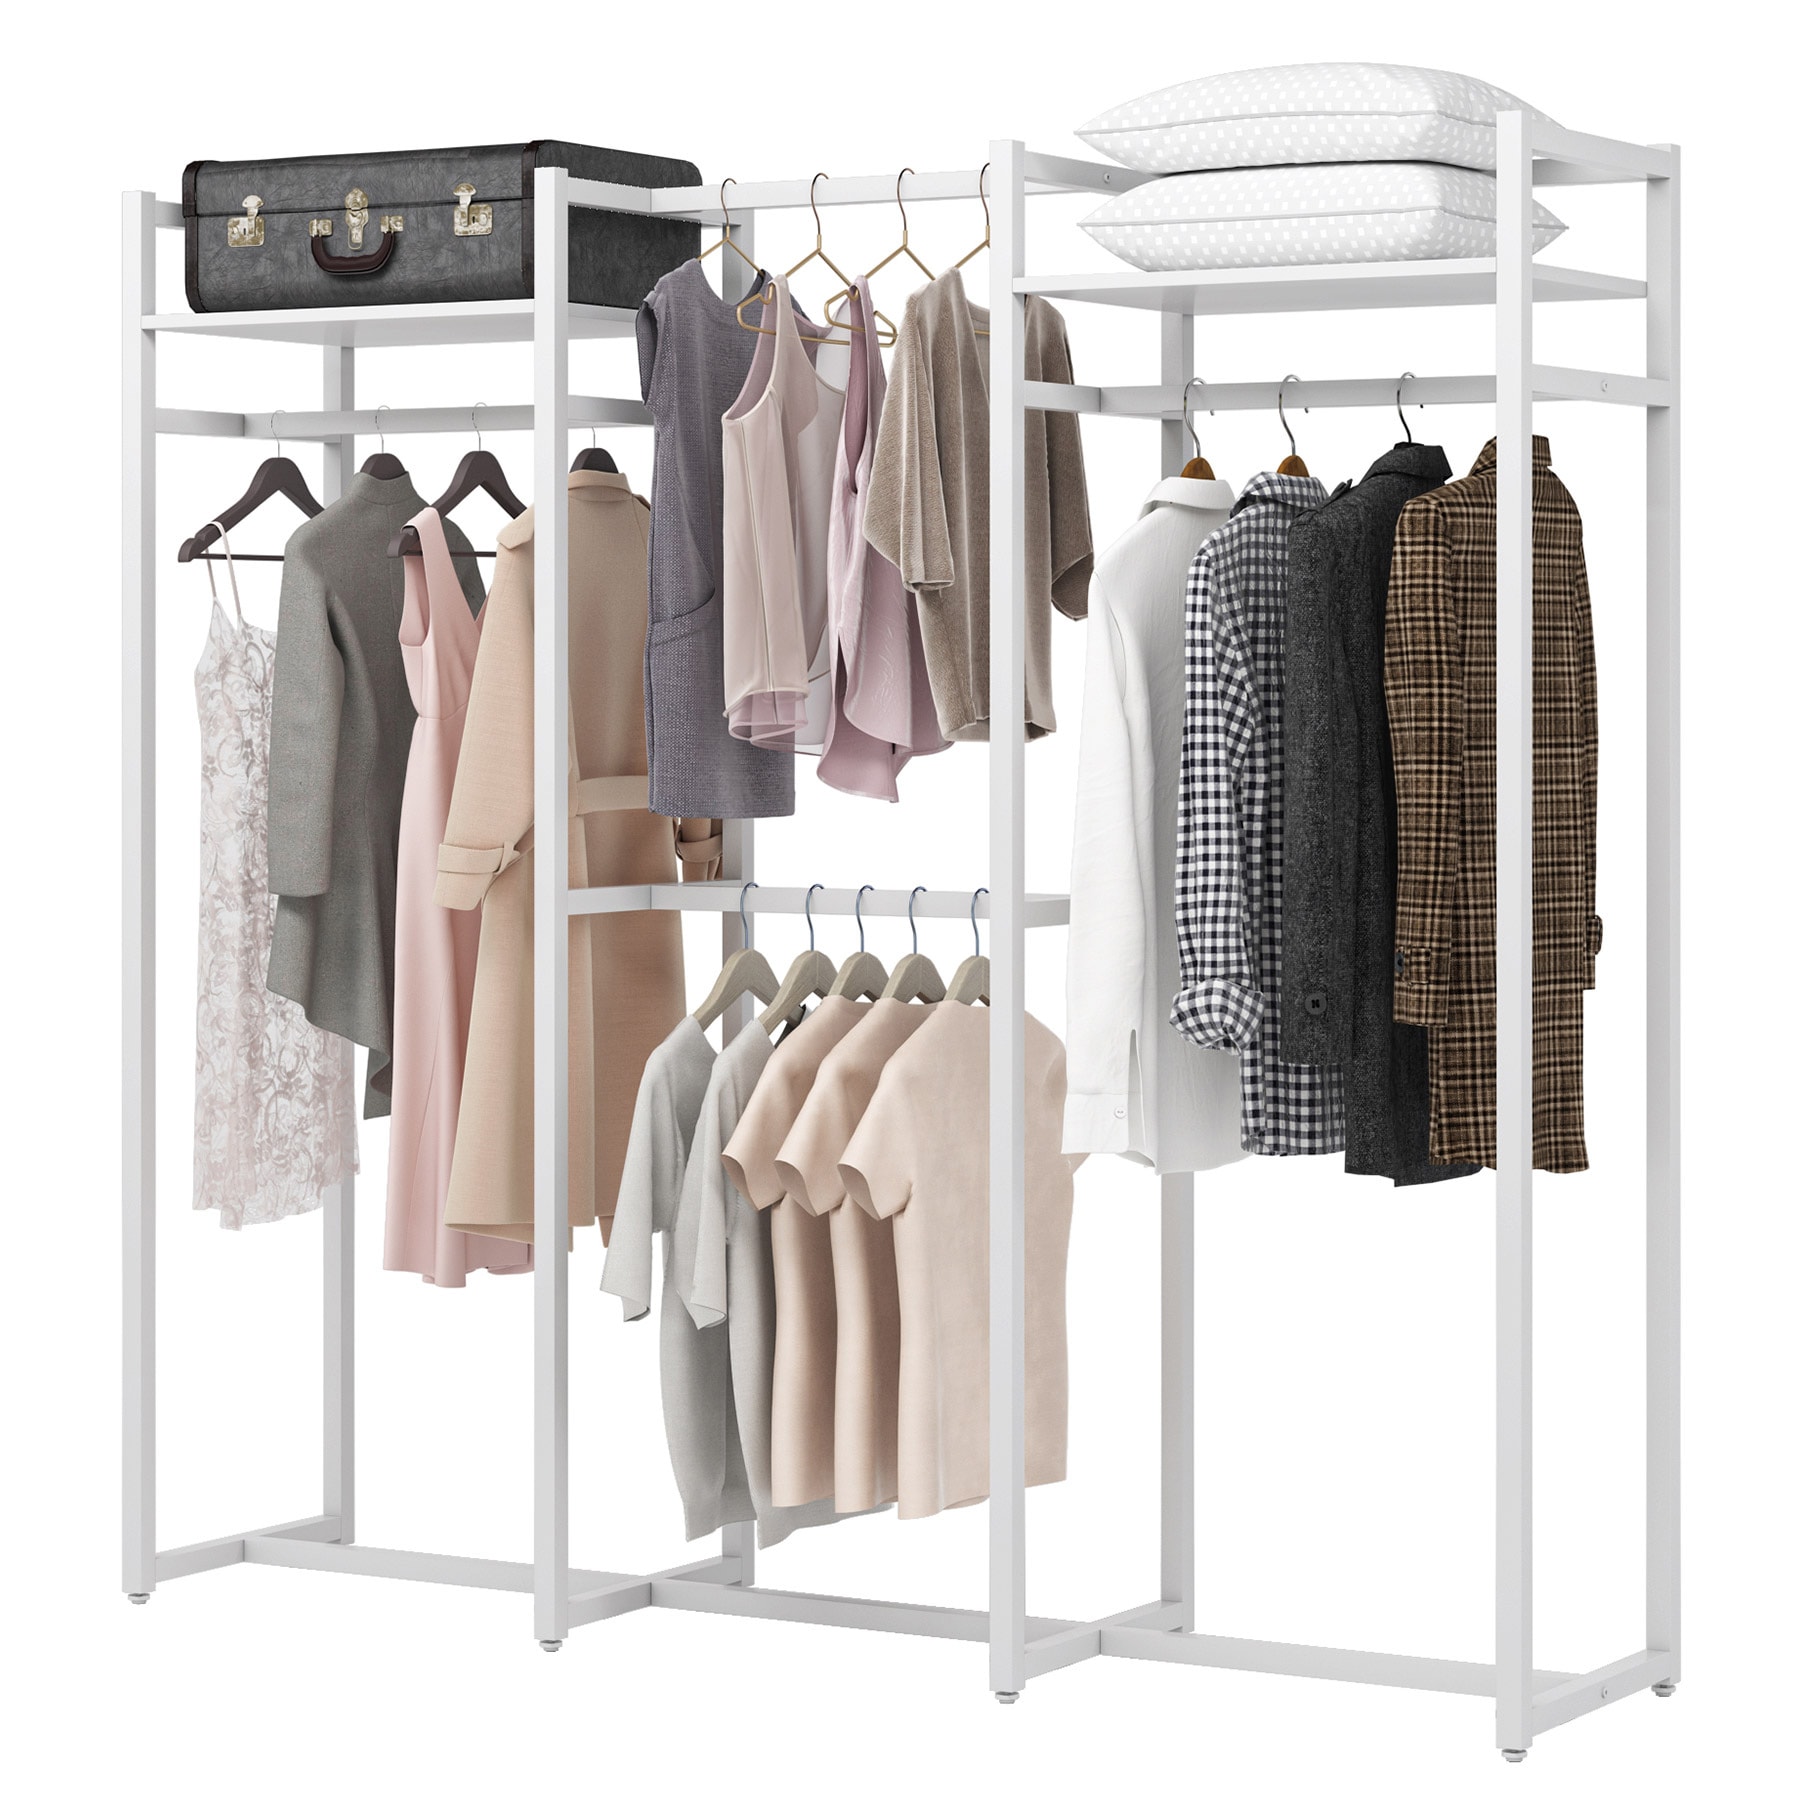 YOFE Light Ivory Wooden Clothes Rack with Metal Frame Closet Organizer  Portable Garment Rack with 2 Storage Box & Side Hook  CamyIY-GI41554W1162-crack01 - The Home Depot